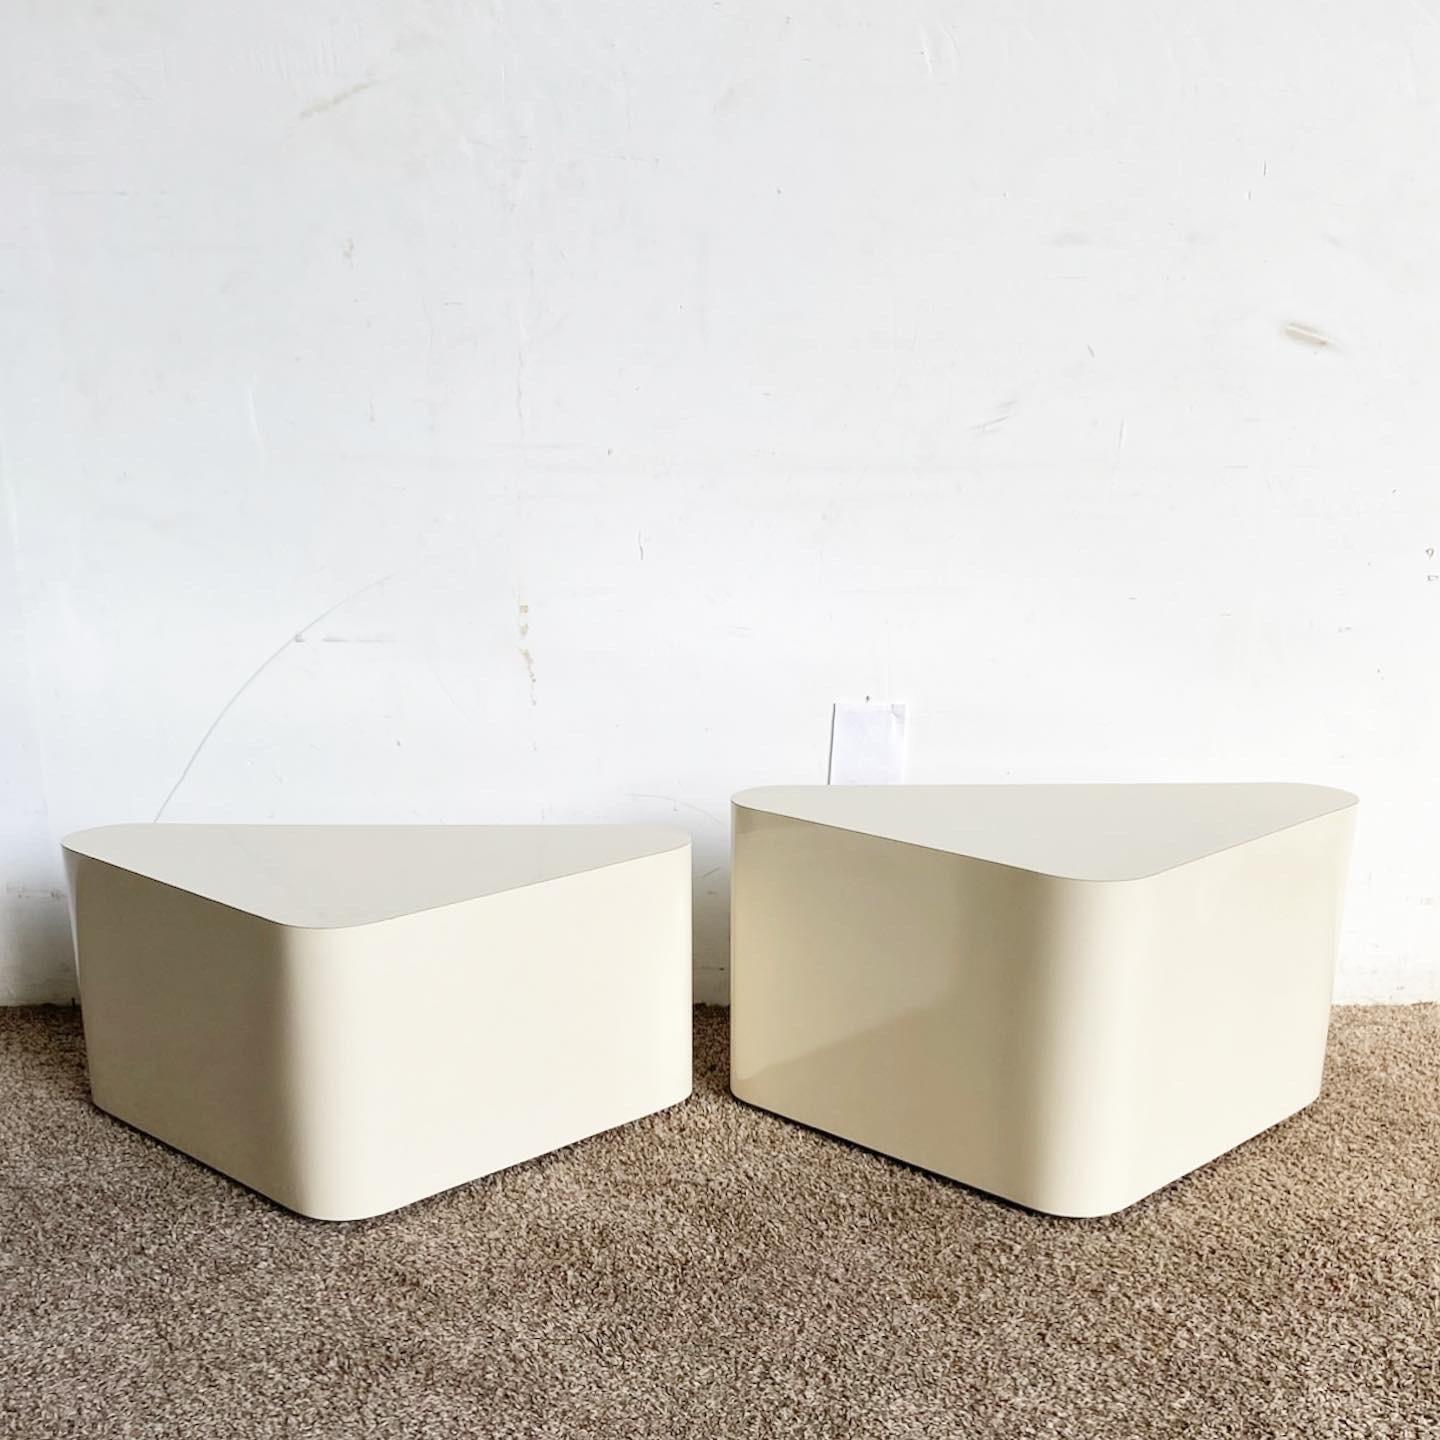 Add a modern touch to your living space with these Postmodern Cream Lacquer Laminate Triangular Nesting Side Tables. Perfect blend of style and functionality.

Dimensions: Shorter table has a height of 13.75‚Äù
Material: Finished in sleek cream